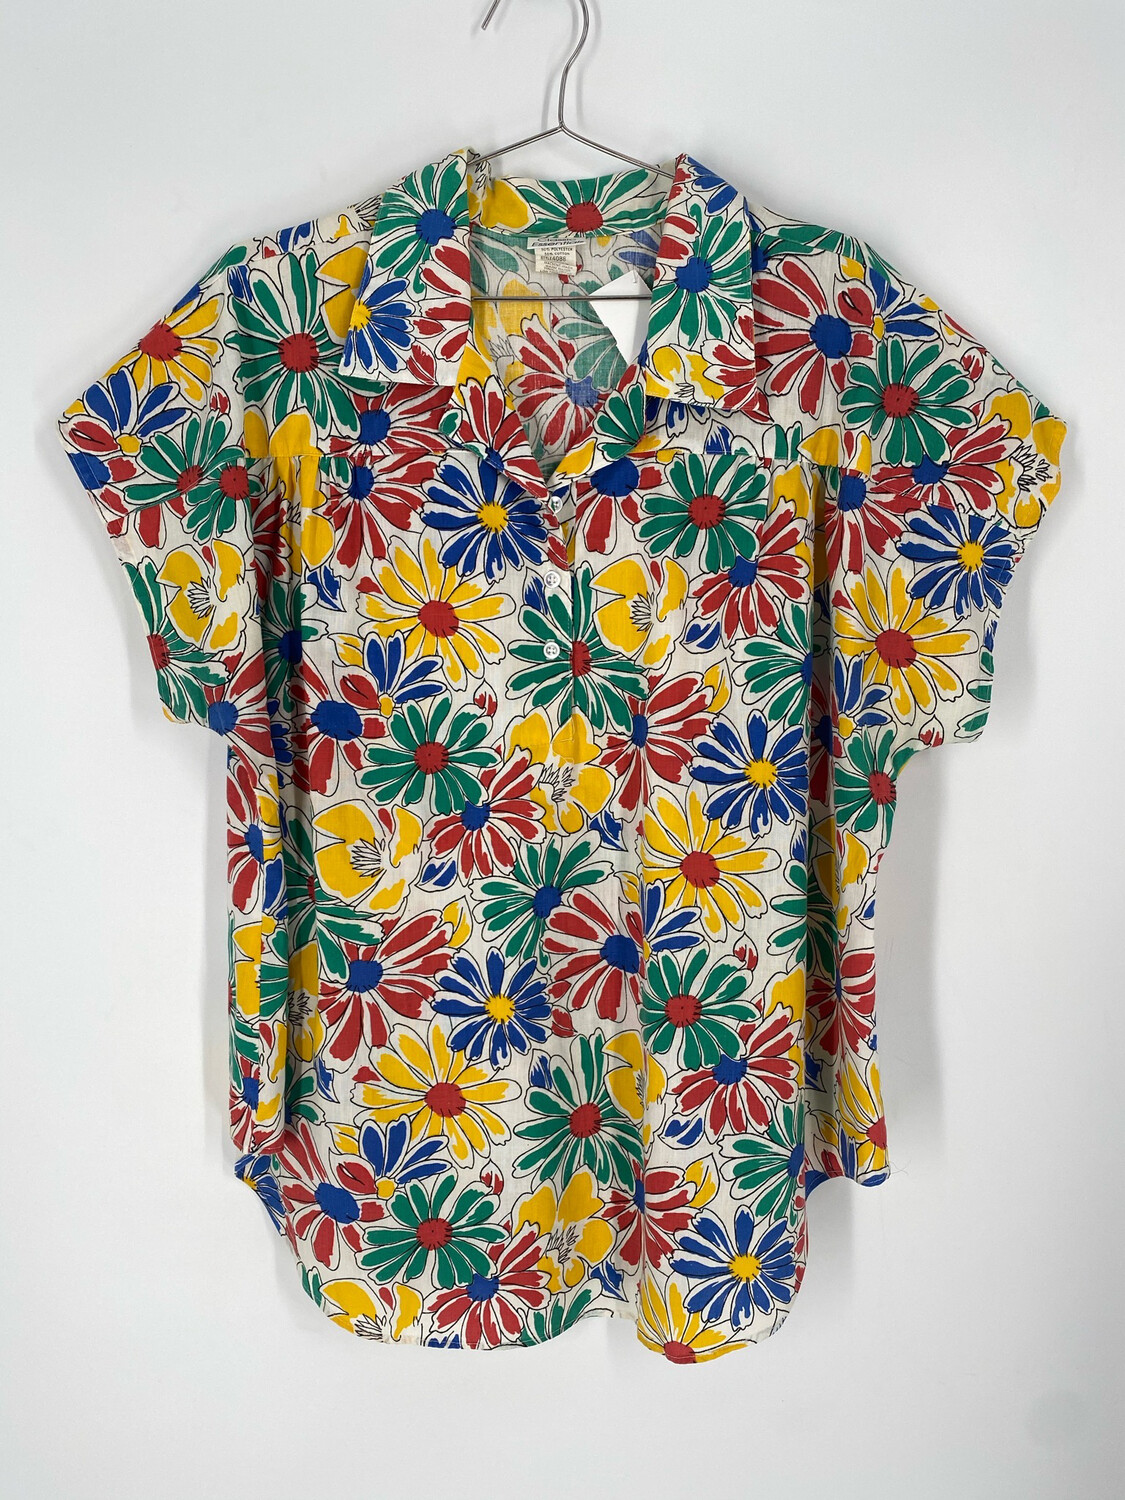 Classic Essentials Multi-Color Floral Short Sleeve Top Size 20